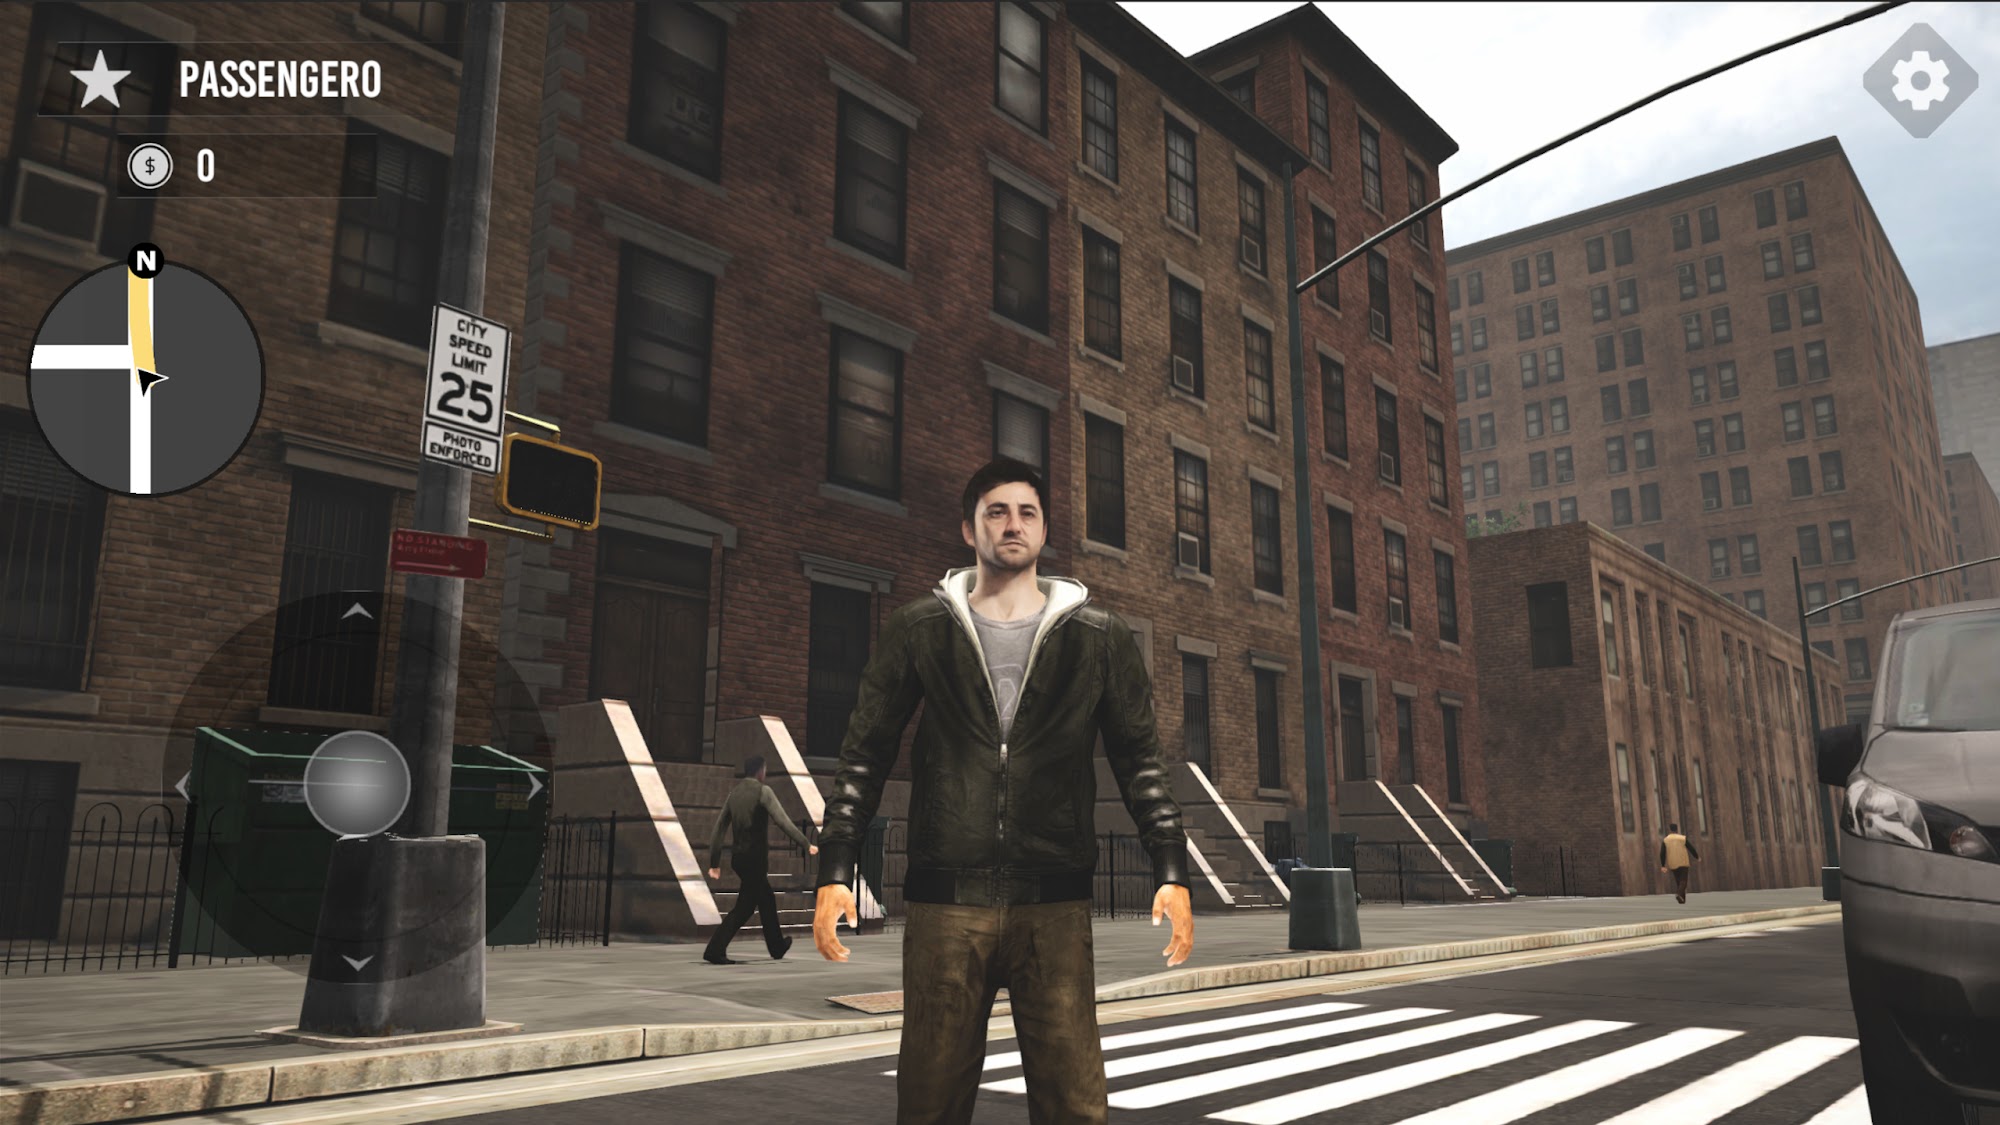 NYC Taxi - Rush Driver - Android game screenshots.